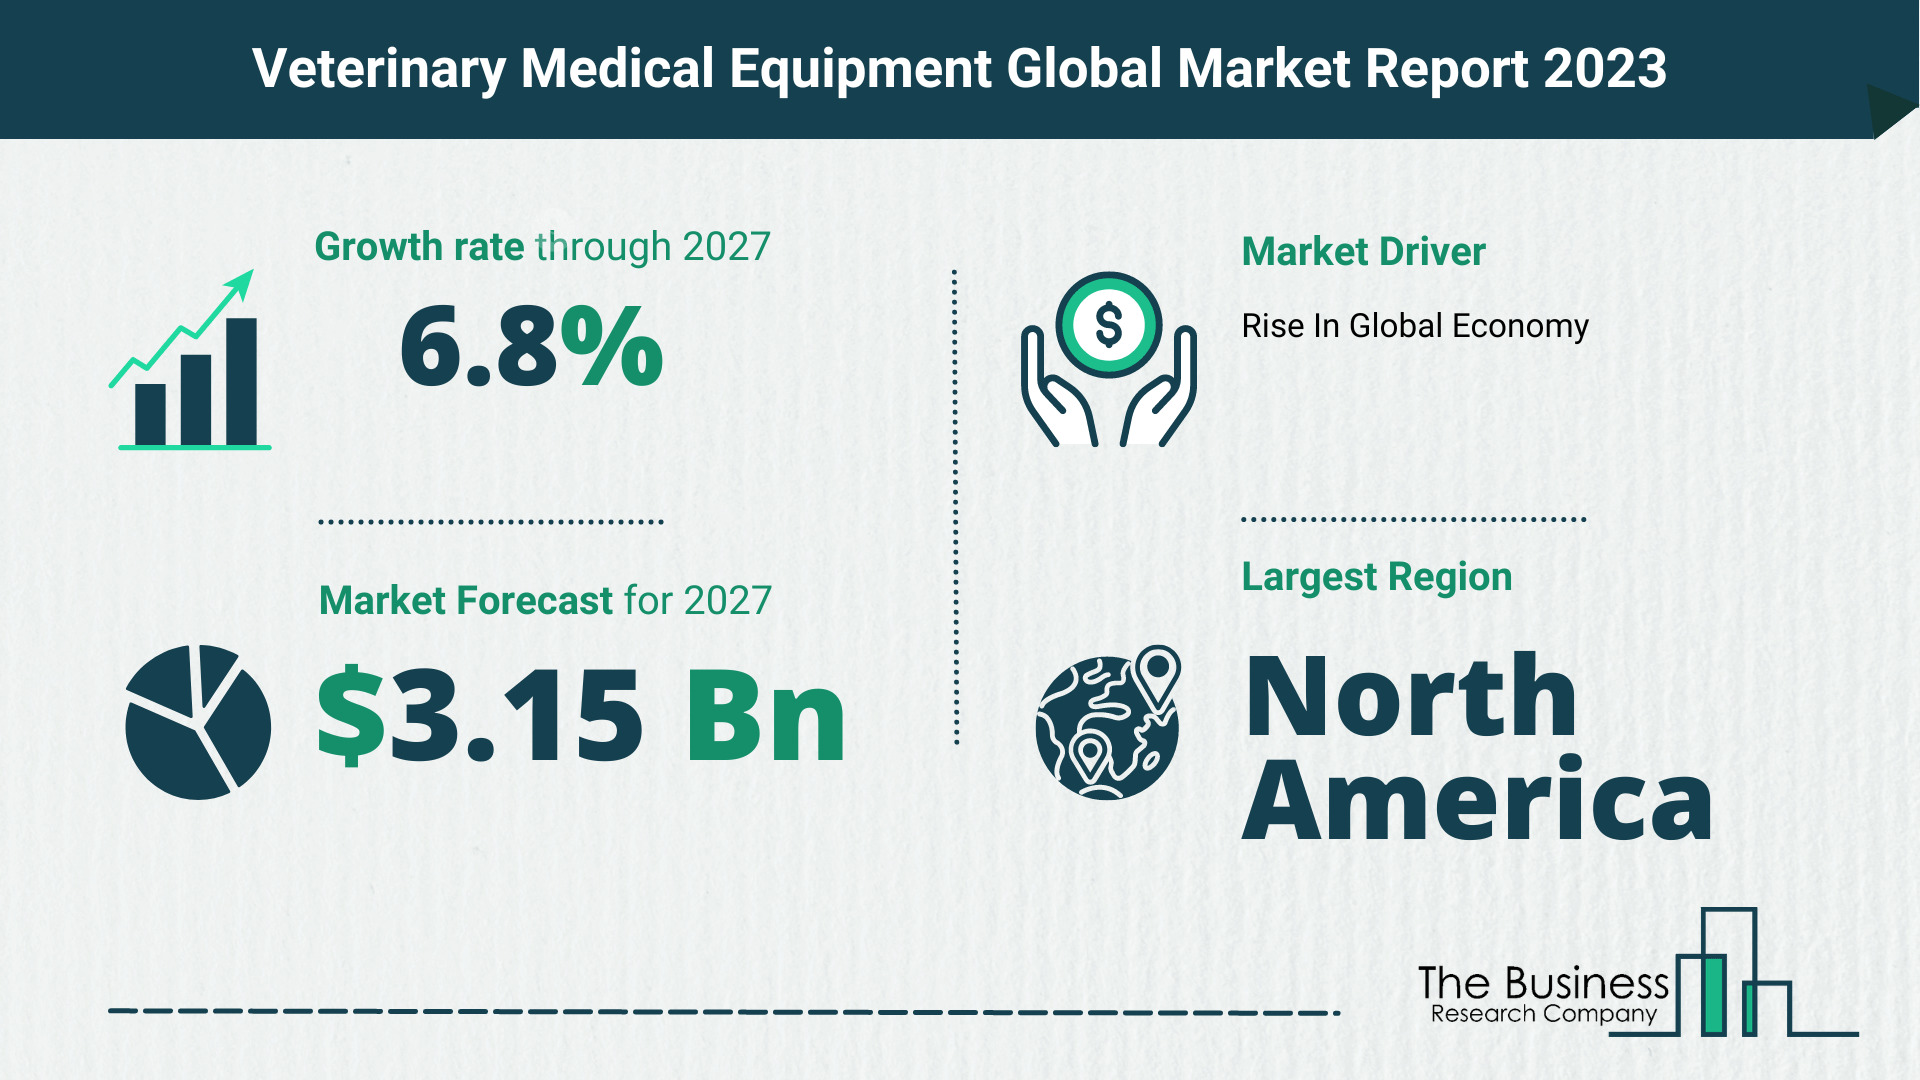 Global Veterinary Medical Equipment Market Opportunities And Strategies 2023